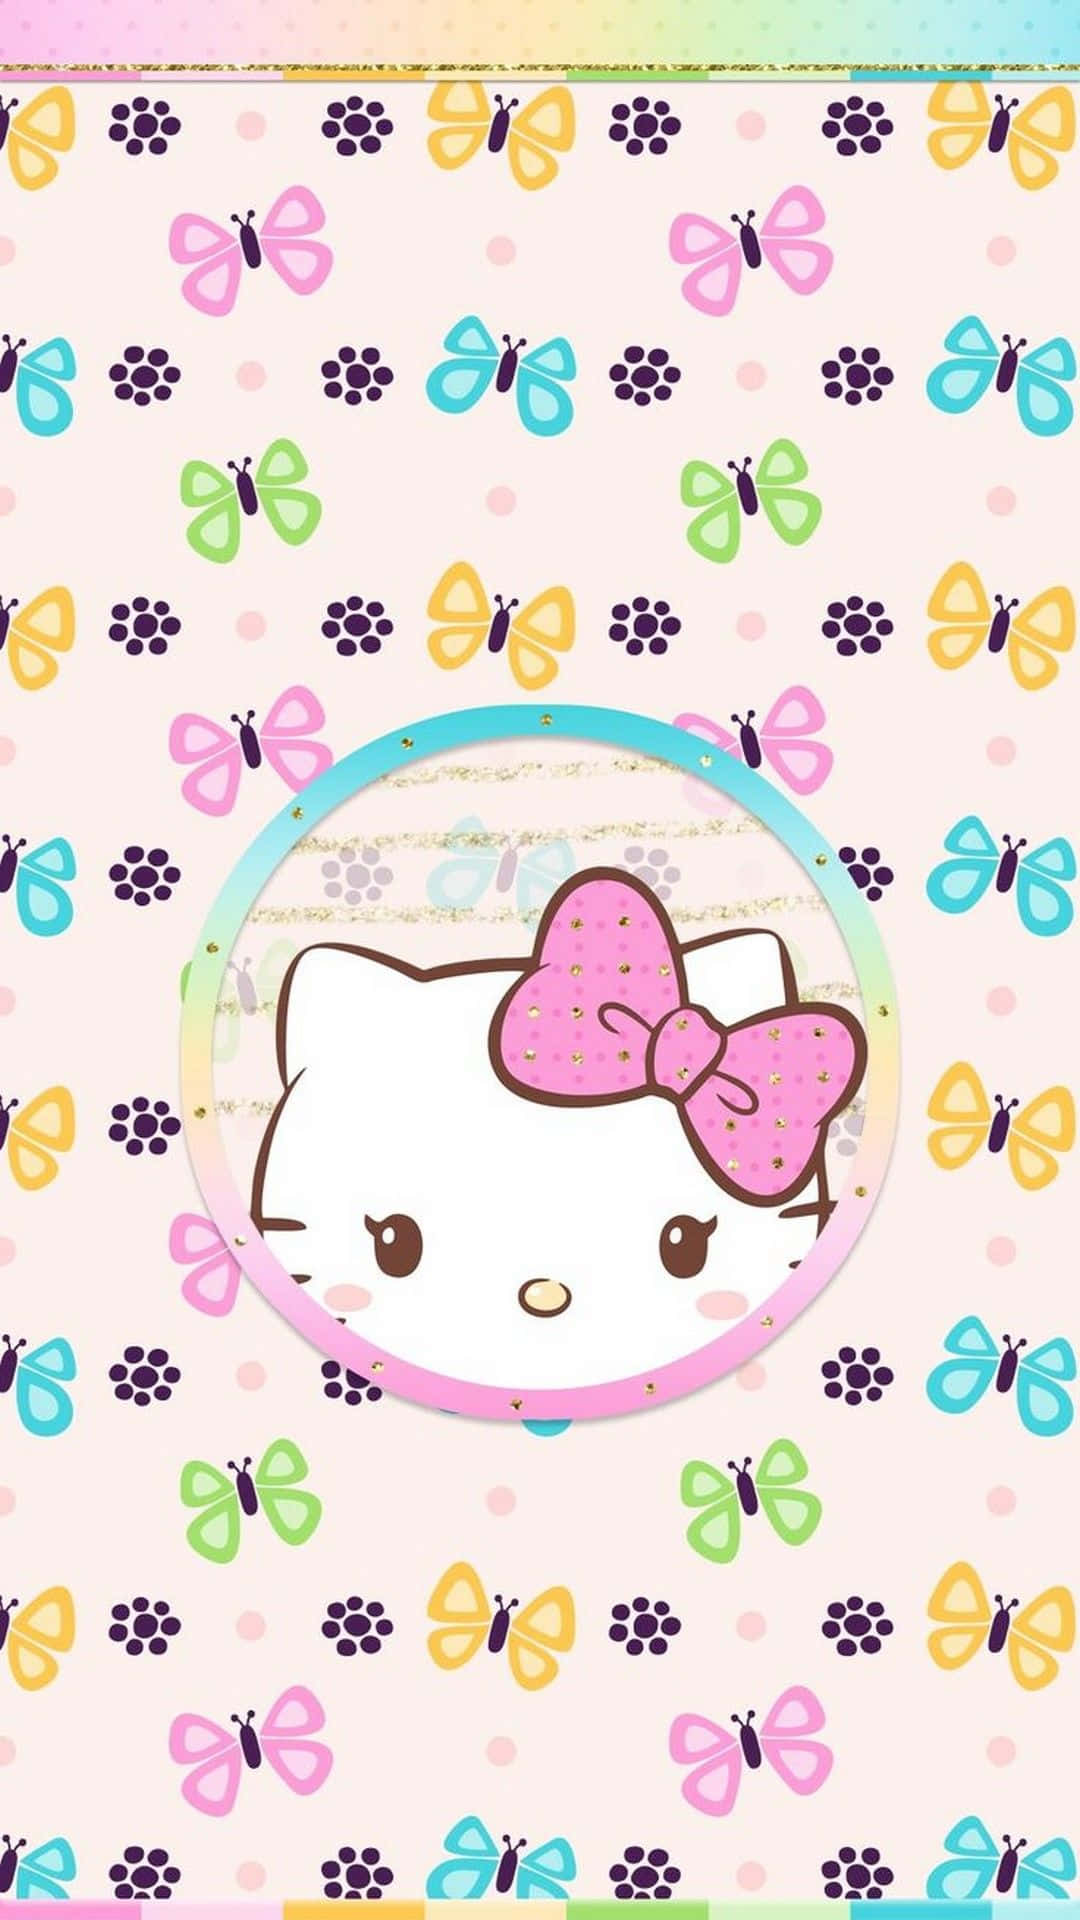 "Reach Out and Connect with Sanrio Phone" Wallpaper